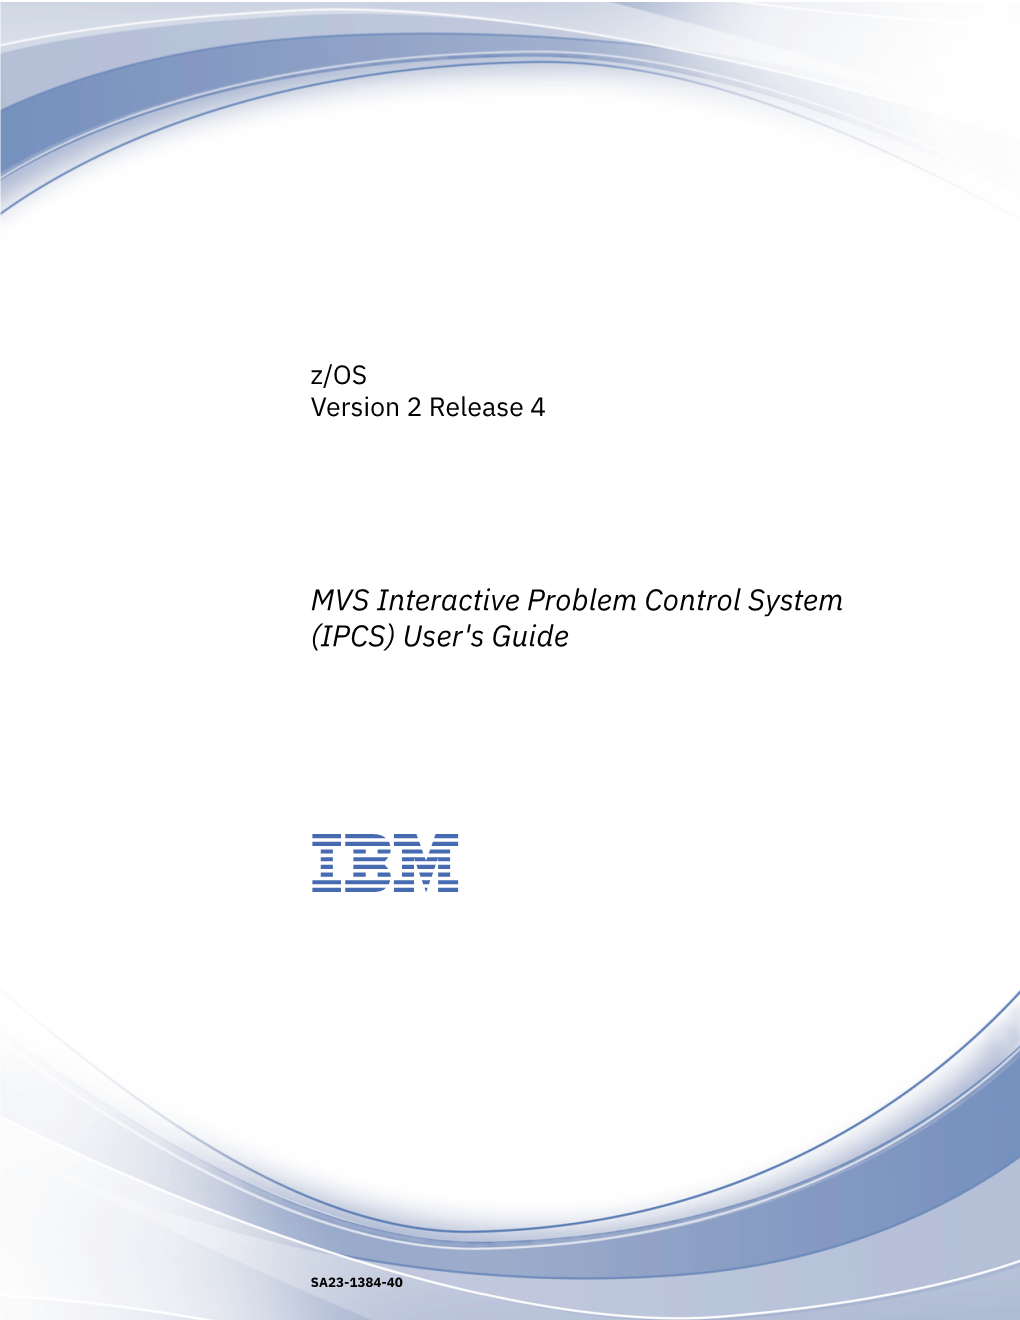 Z/OS: Z/OS MVS IPCS User's Guide How to Send Your Comments to IBM